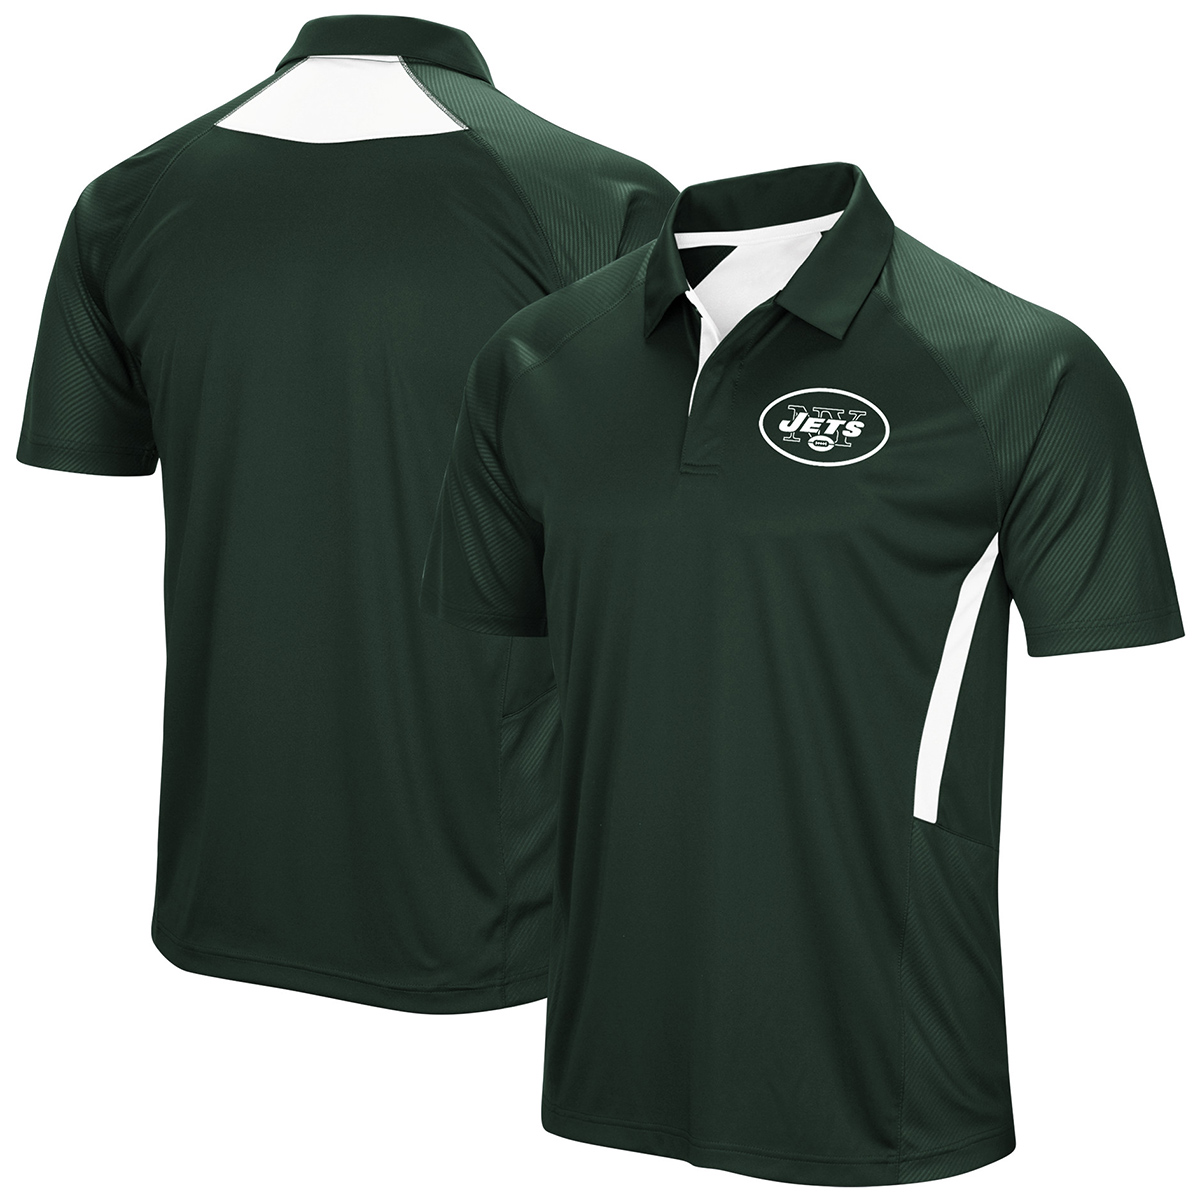 New York Jets Men's Game Day Club Poly Short-Sleeve Polo Shirt - Green, XL